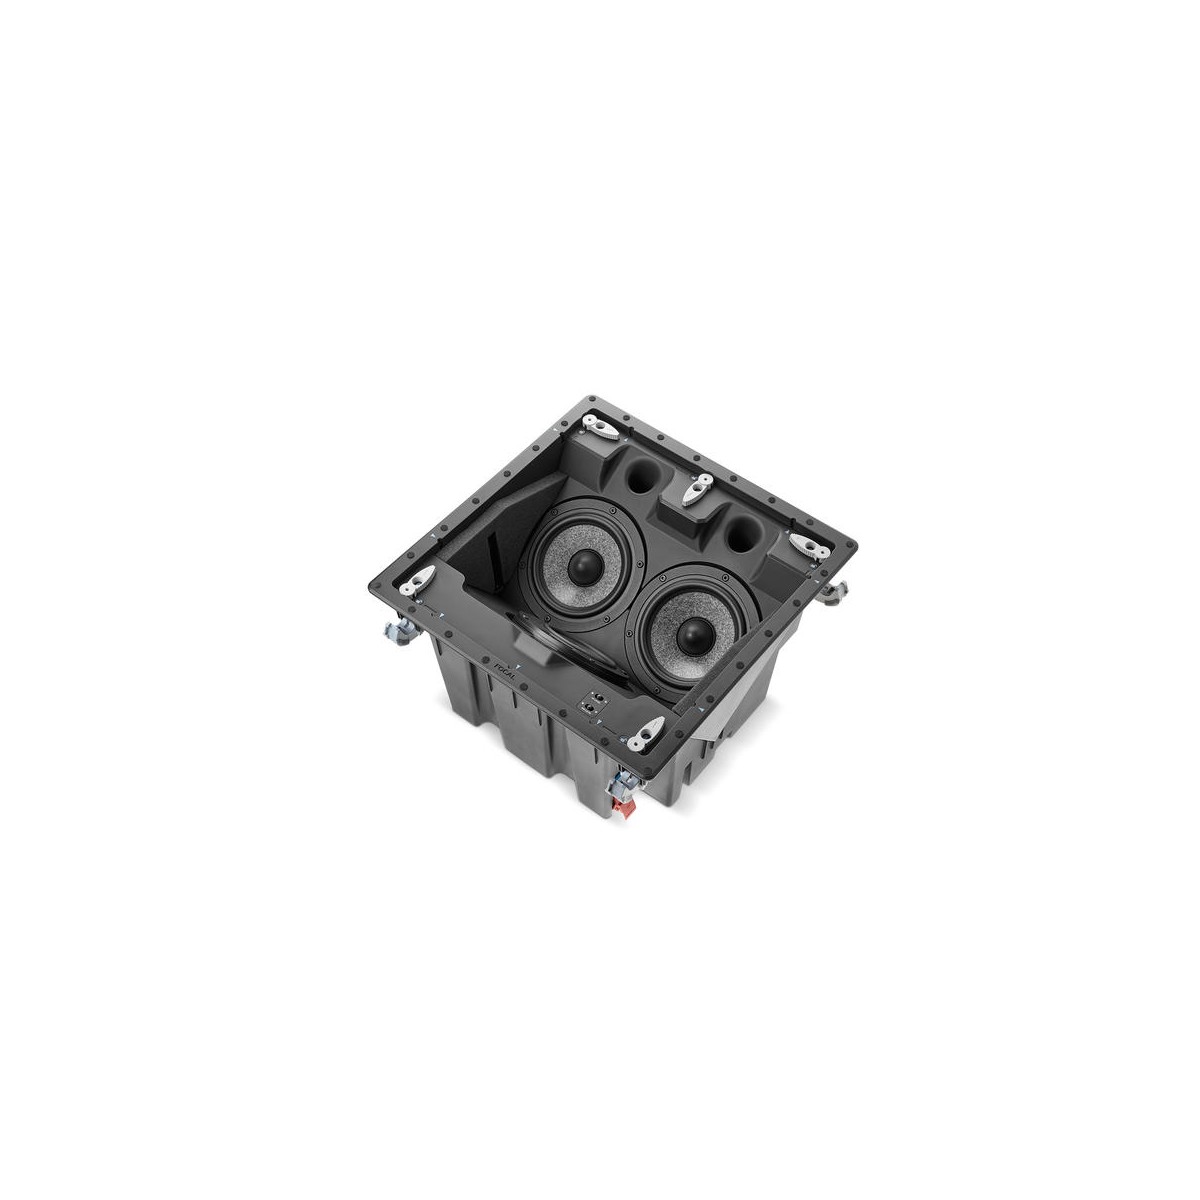 InCeiling speaker 1000 IC LCR 5